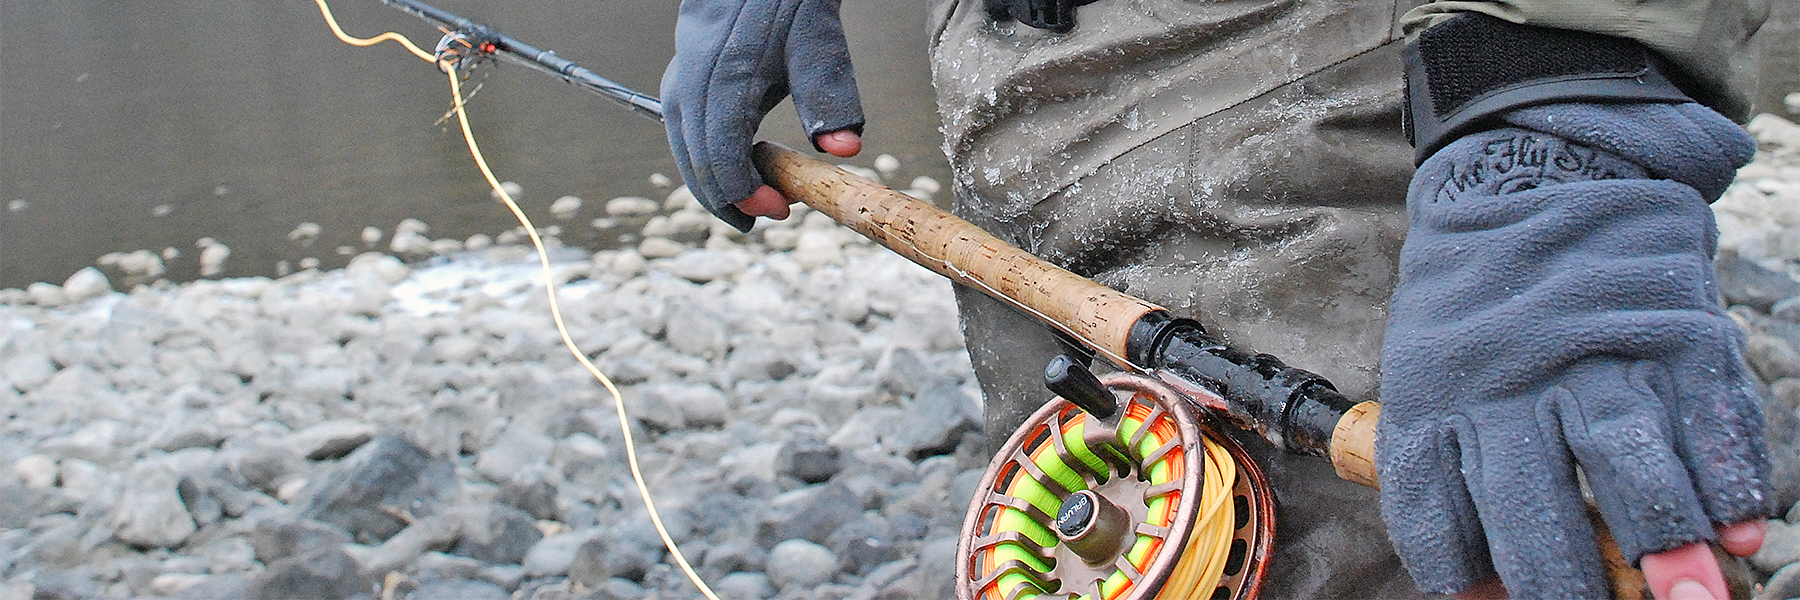 Spey rod and reel in snow conditions